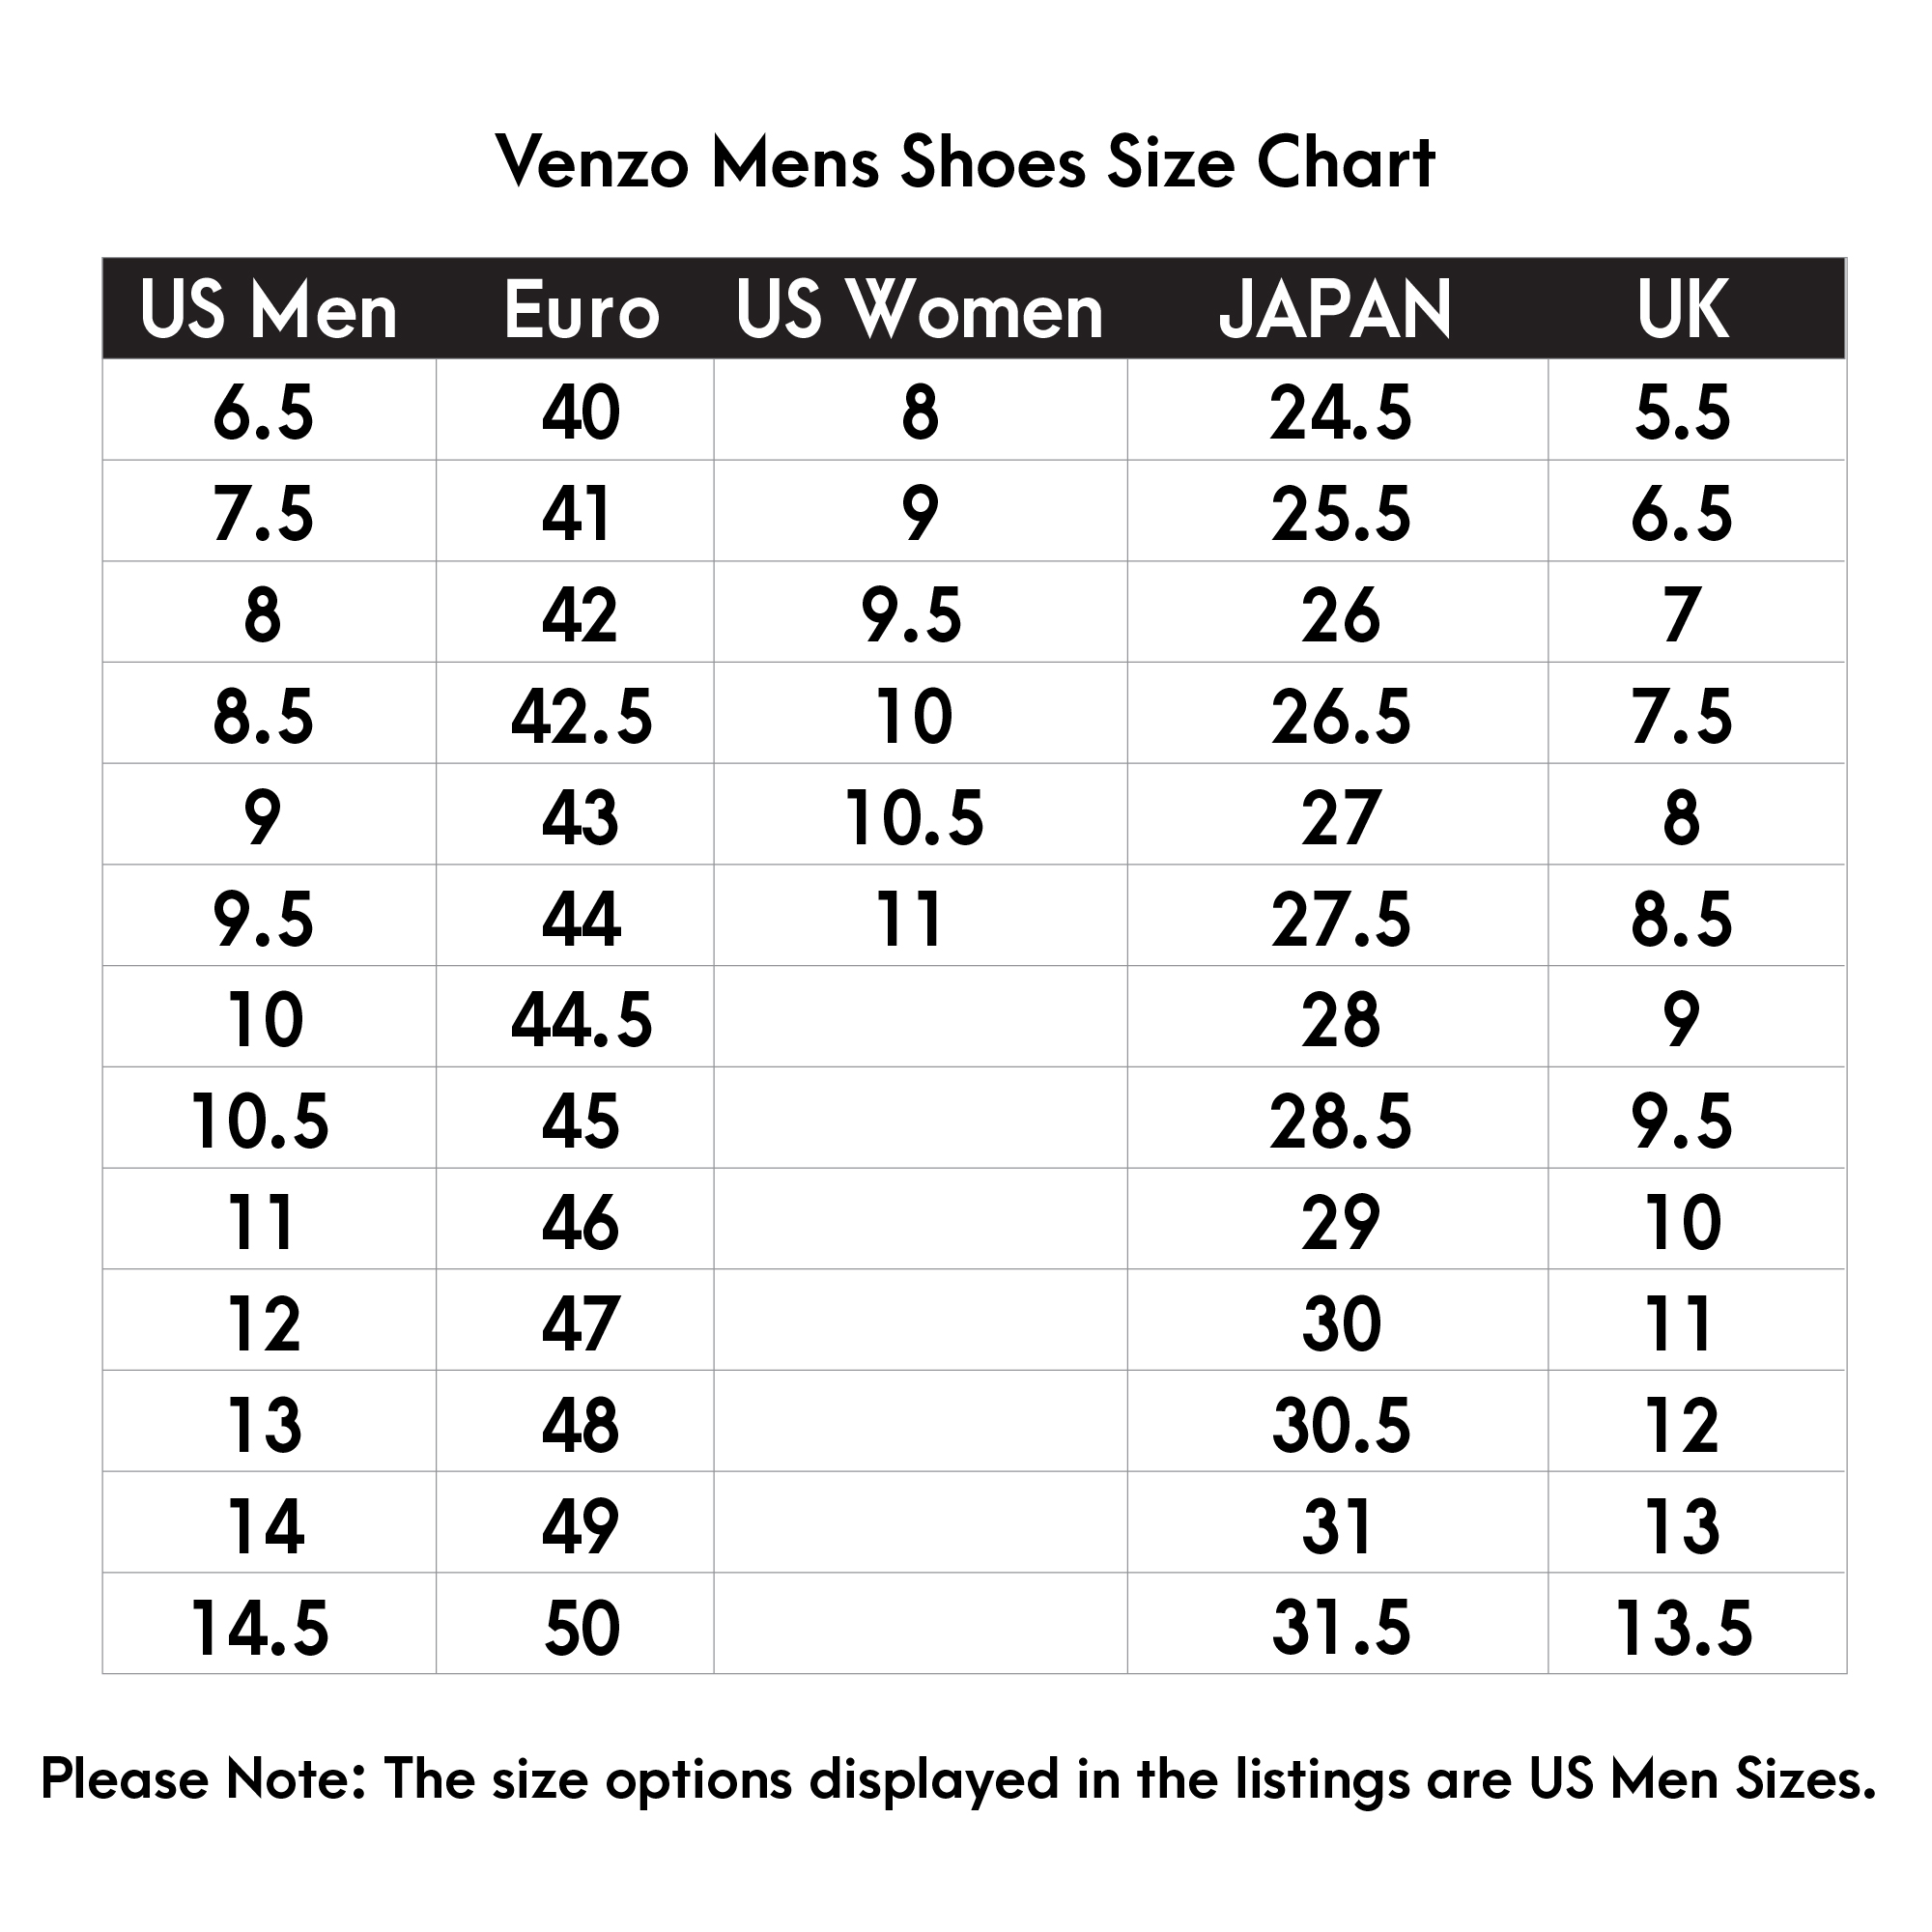 Buy Venzo Cycling Bicycle Cycle Mountain Bike Shoes Men Compatible For Shimano Spd Cleats G Cd